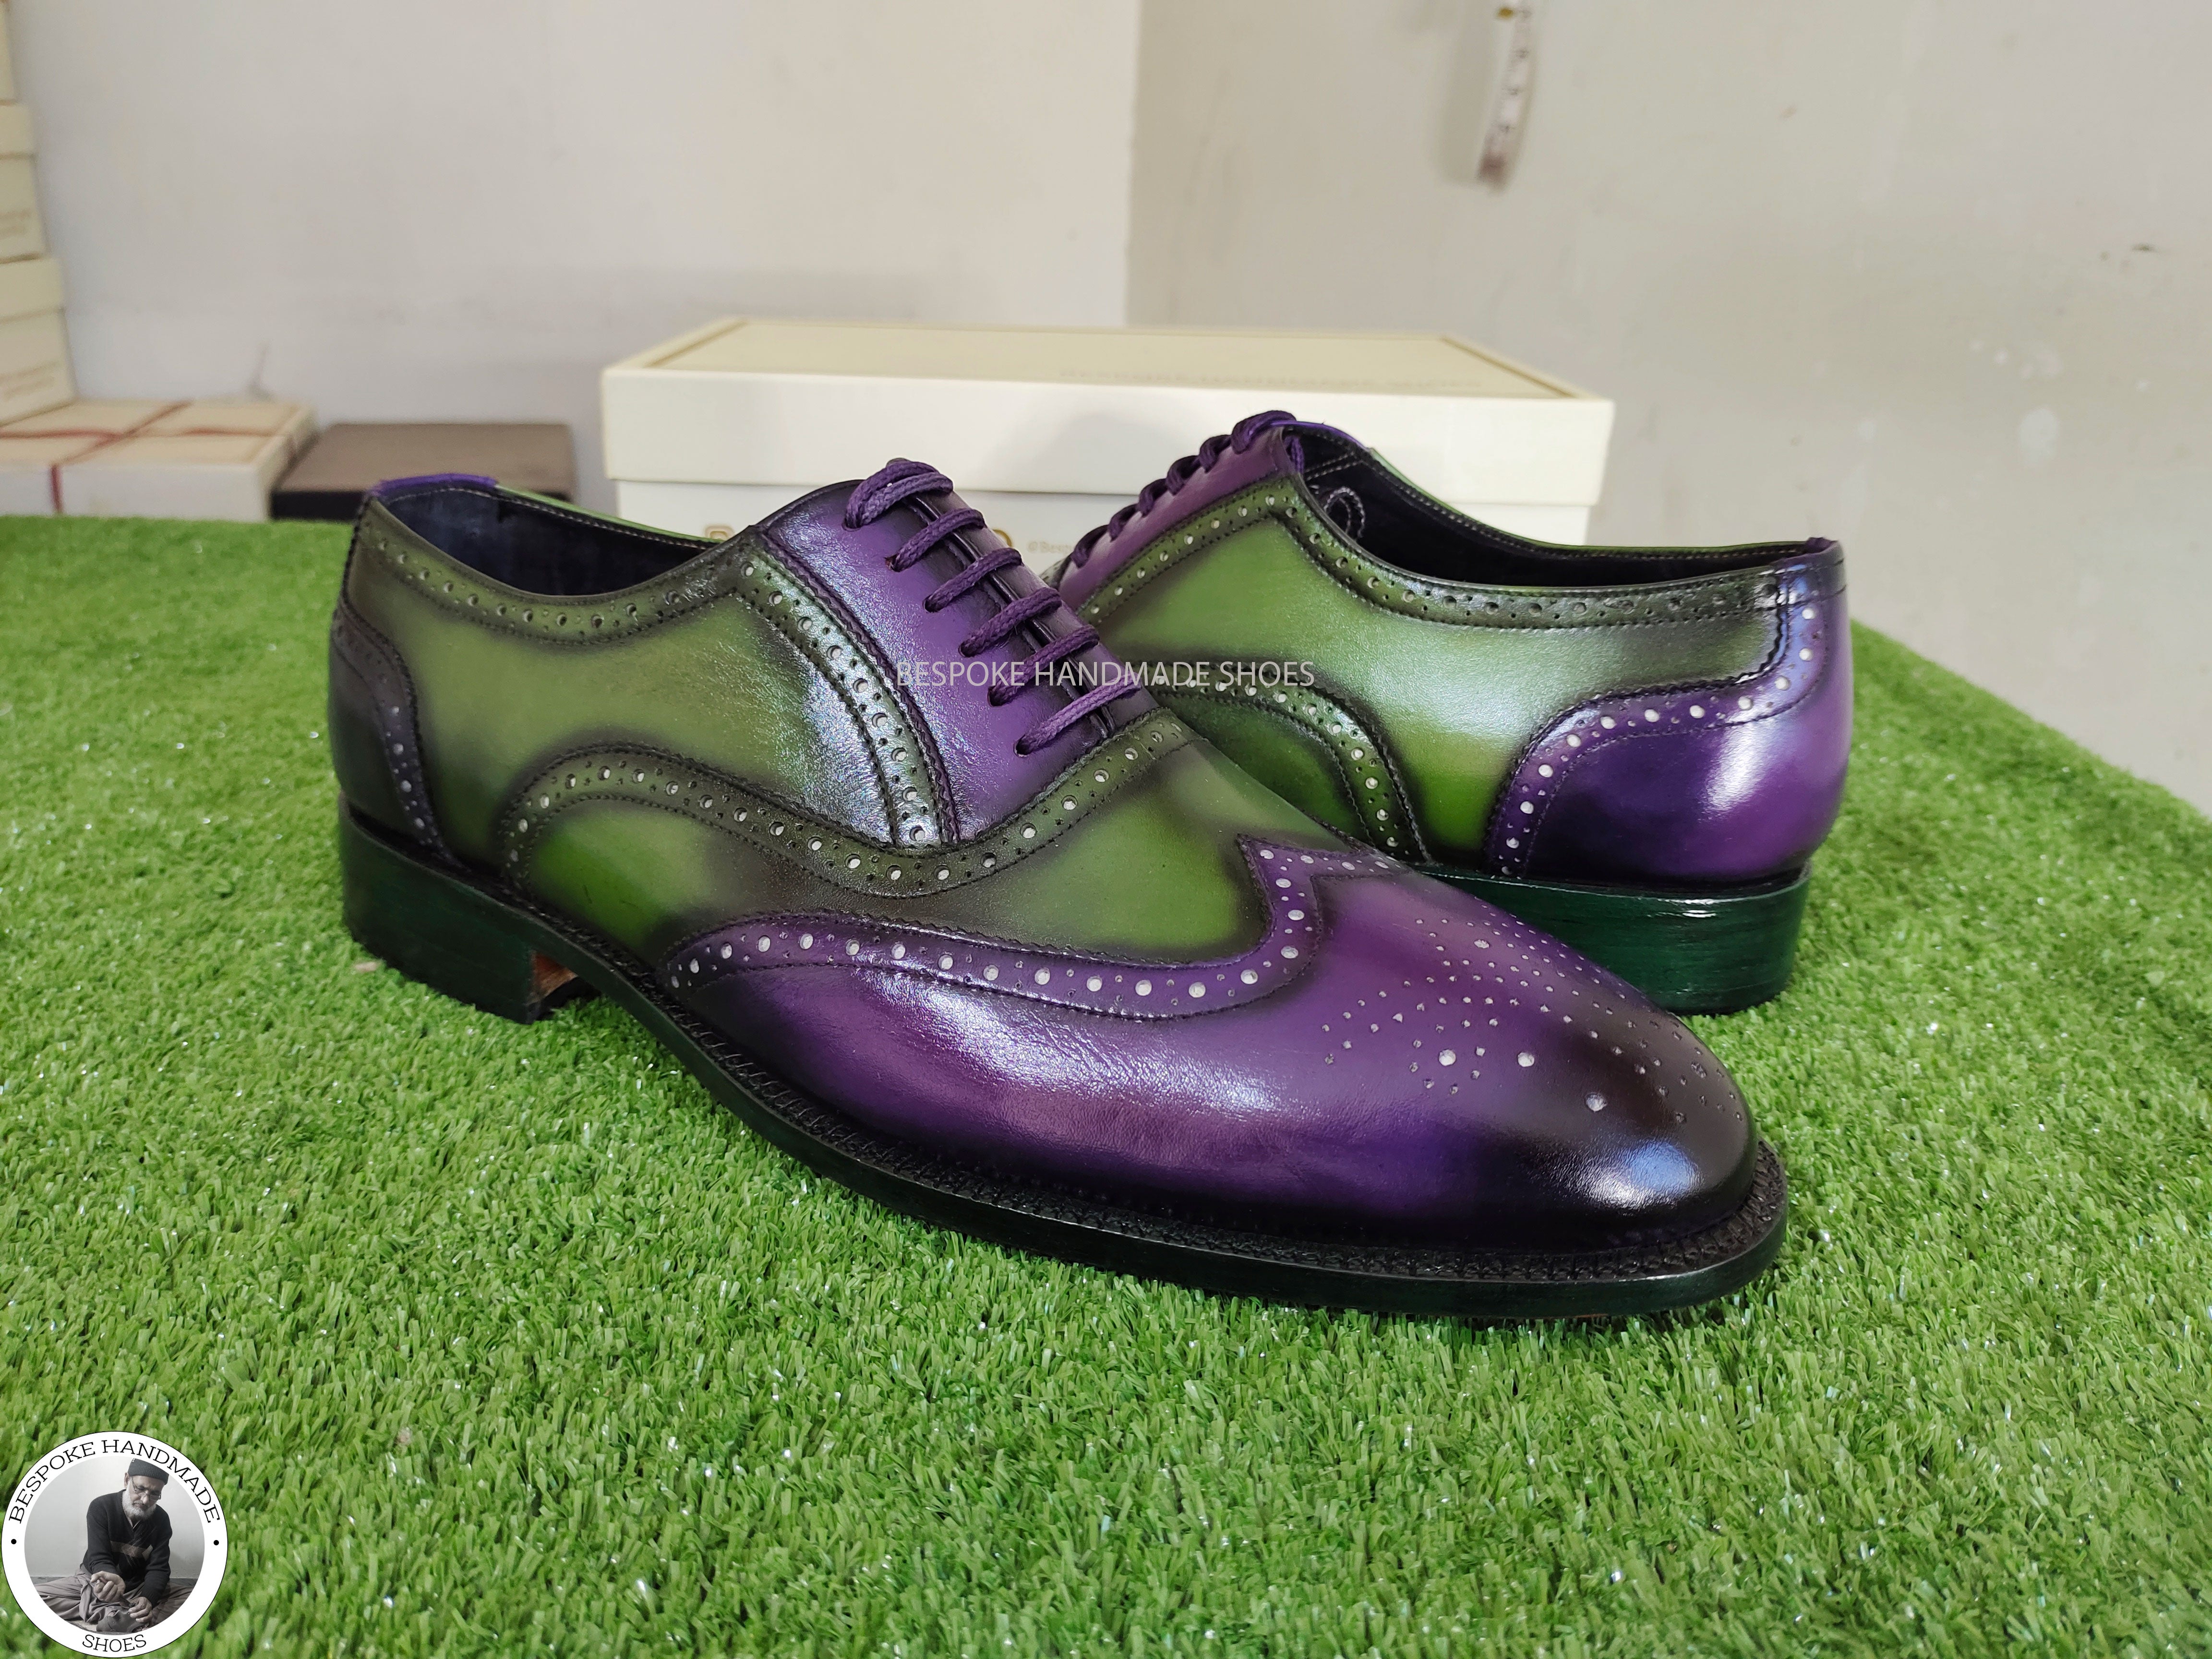 Handmade Genuine Green And Purple Leather  Wingtip Brogue Oxford Lace Up Wedding Shoes